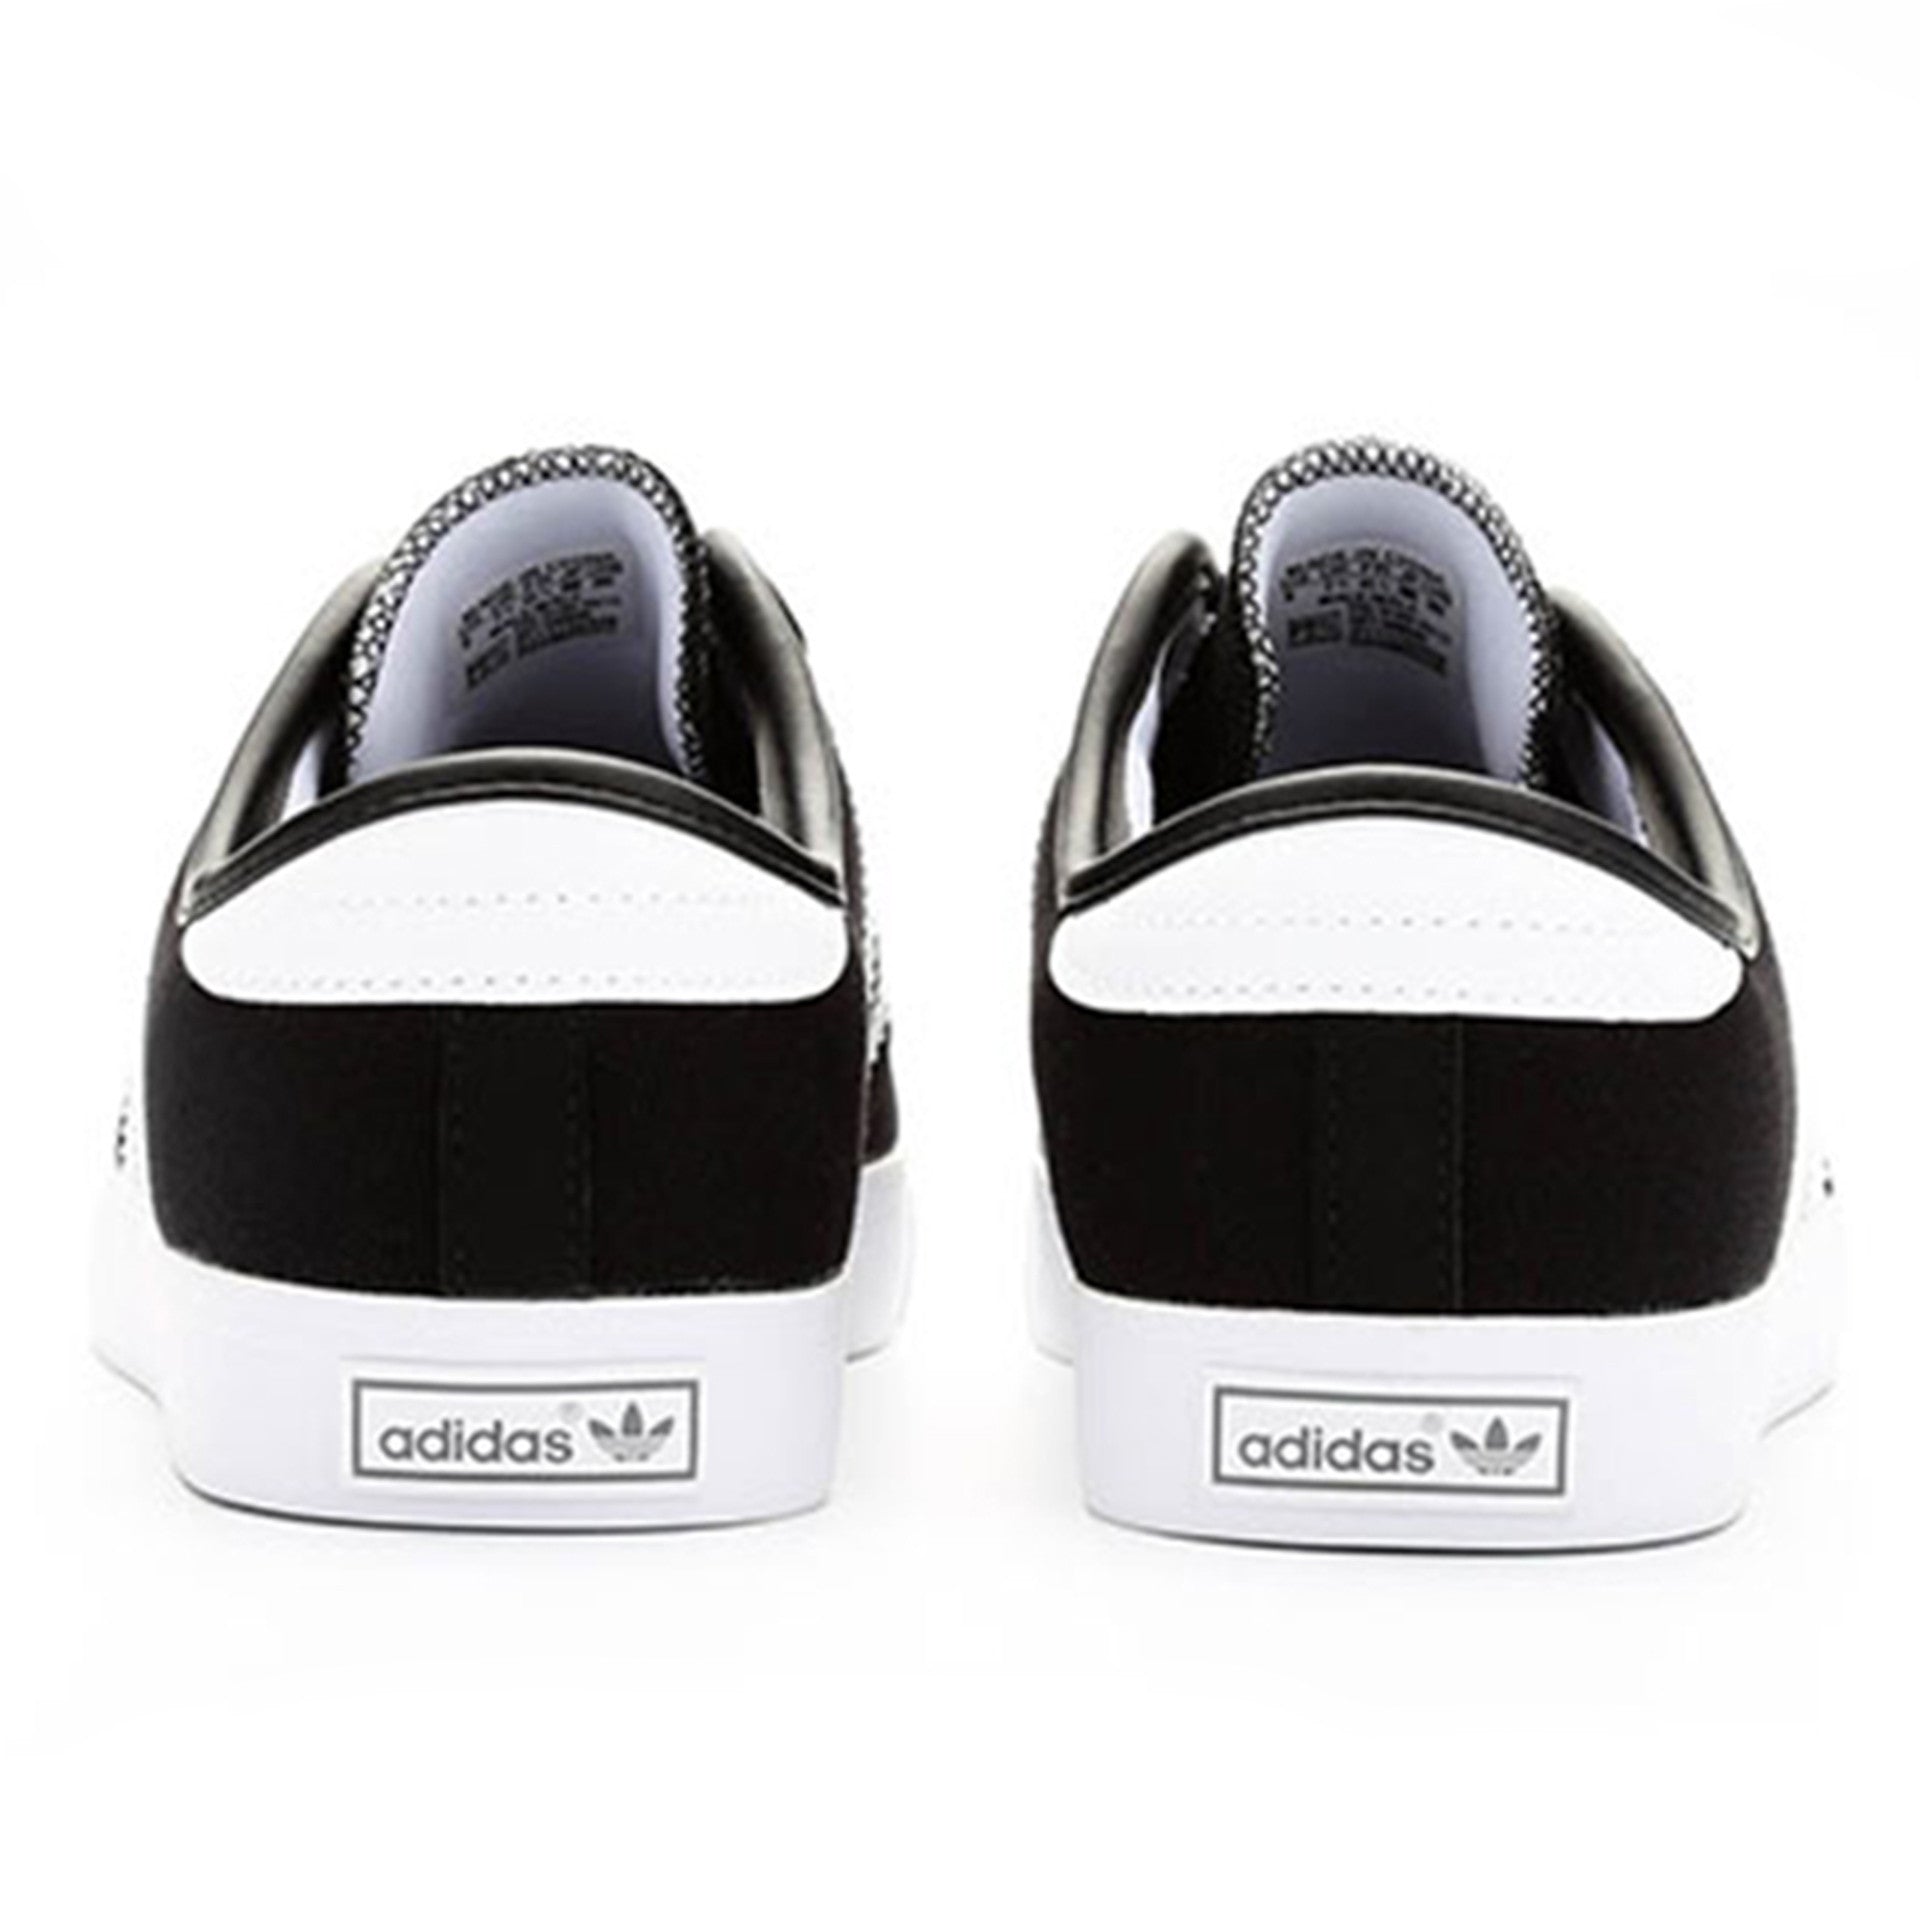 adidas seeley black and white